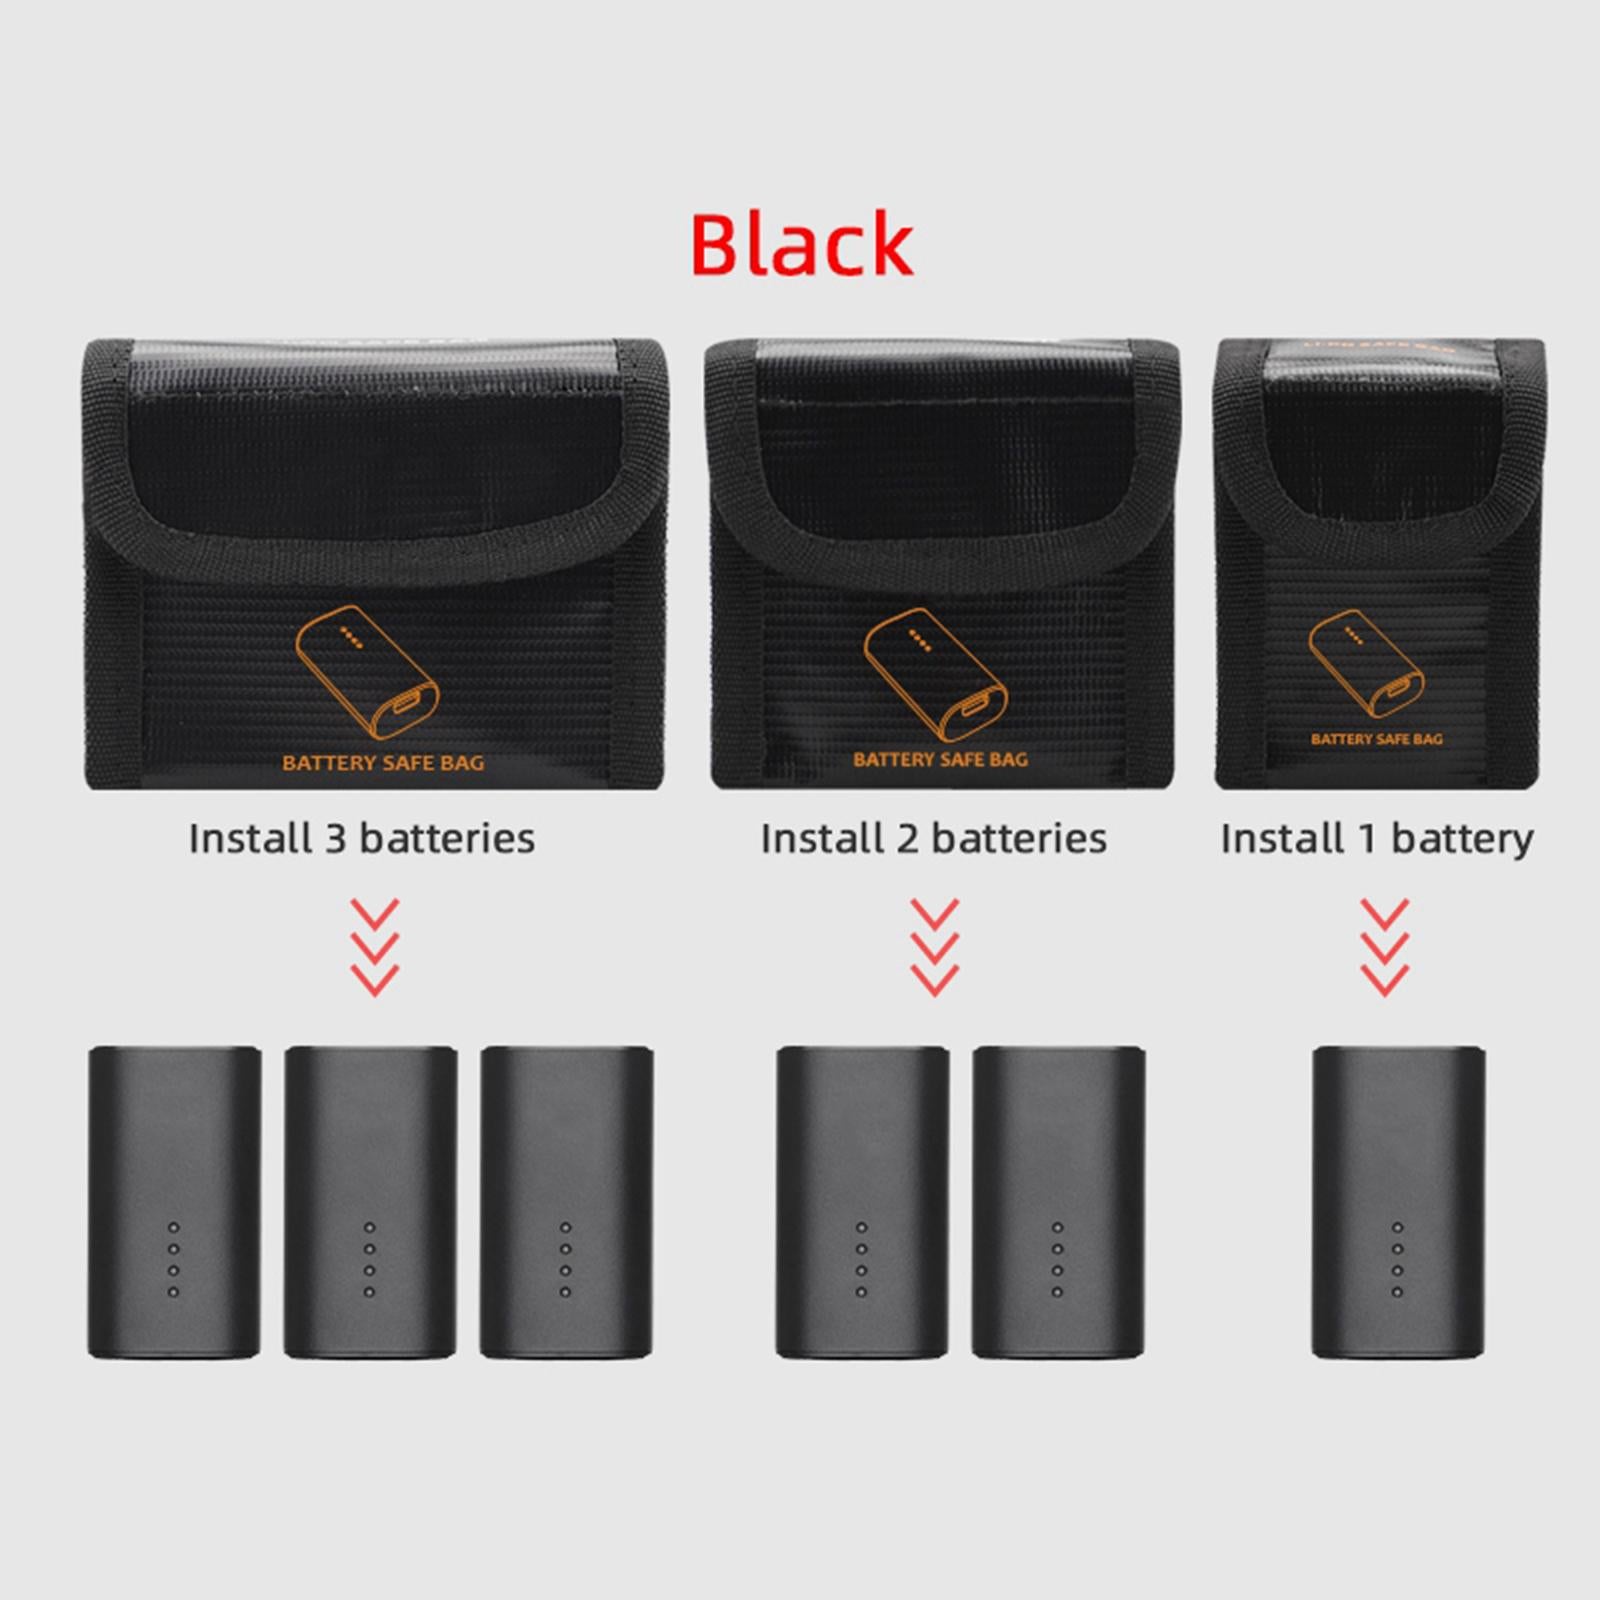 (9x11.3x5cm Waterproof Explosion-Proof Battery Safety Bag for DJI Racing Black S